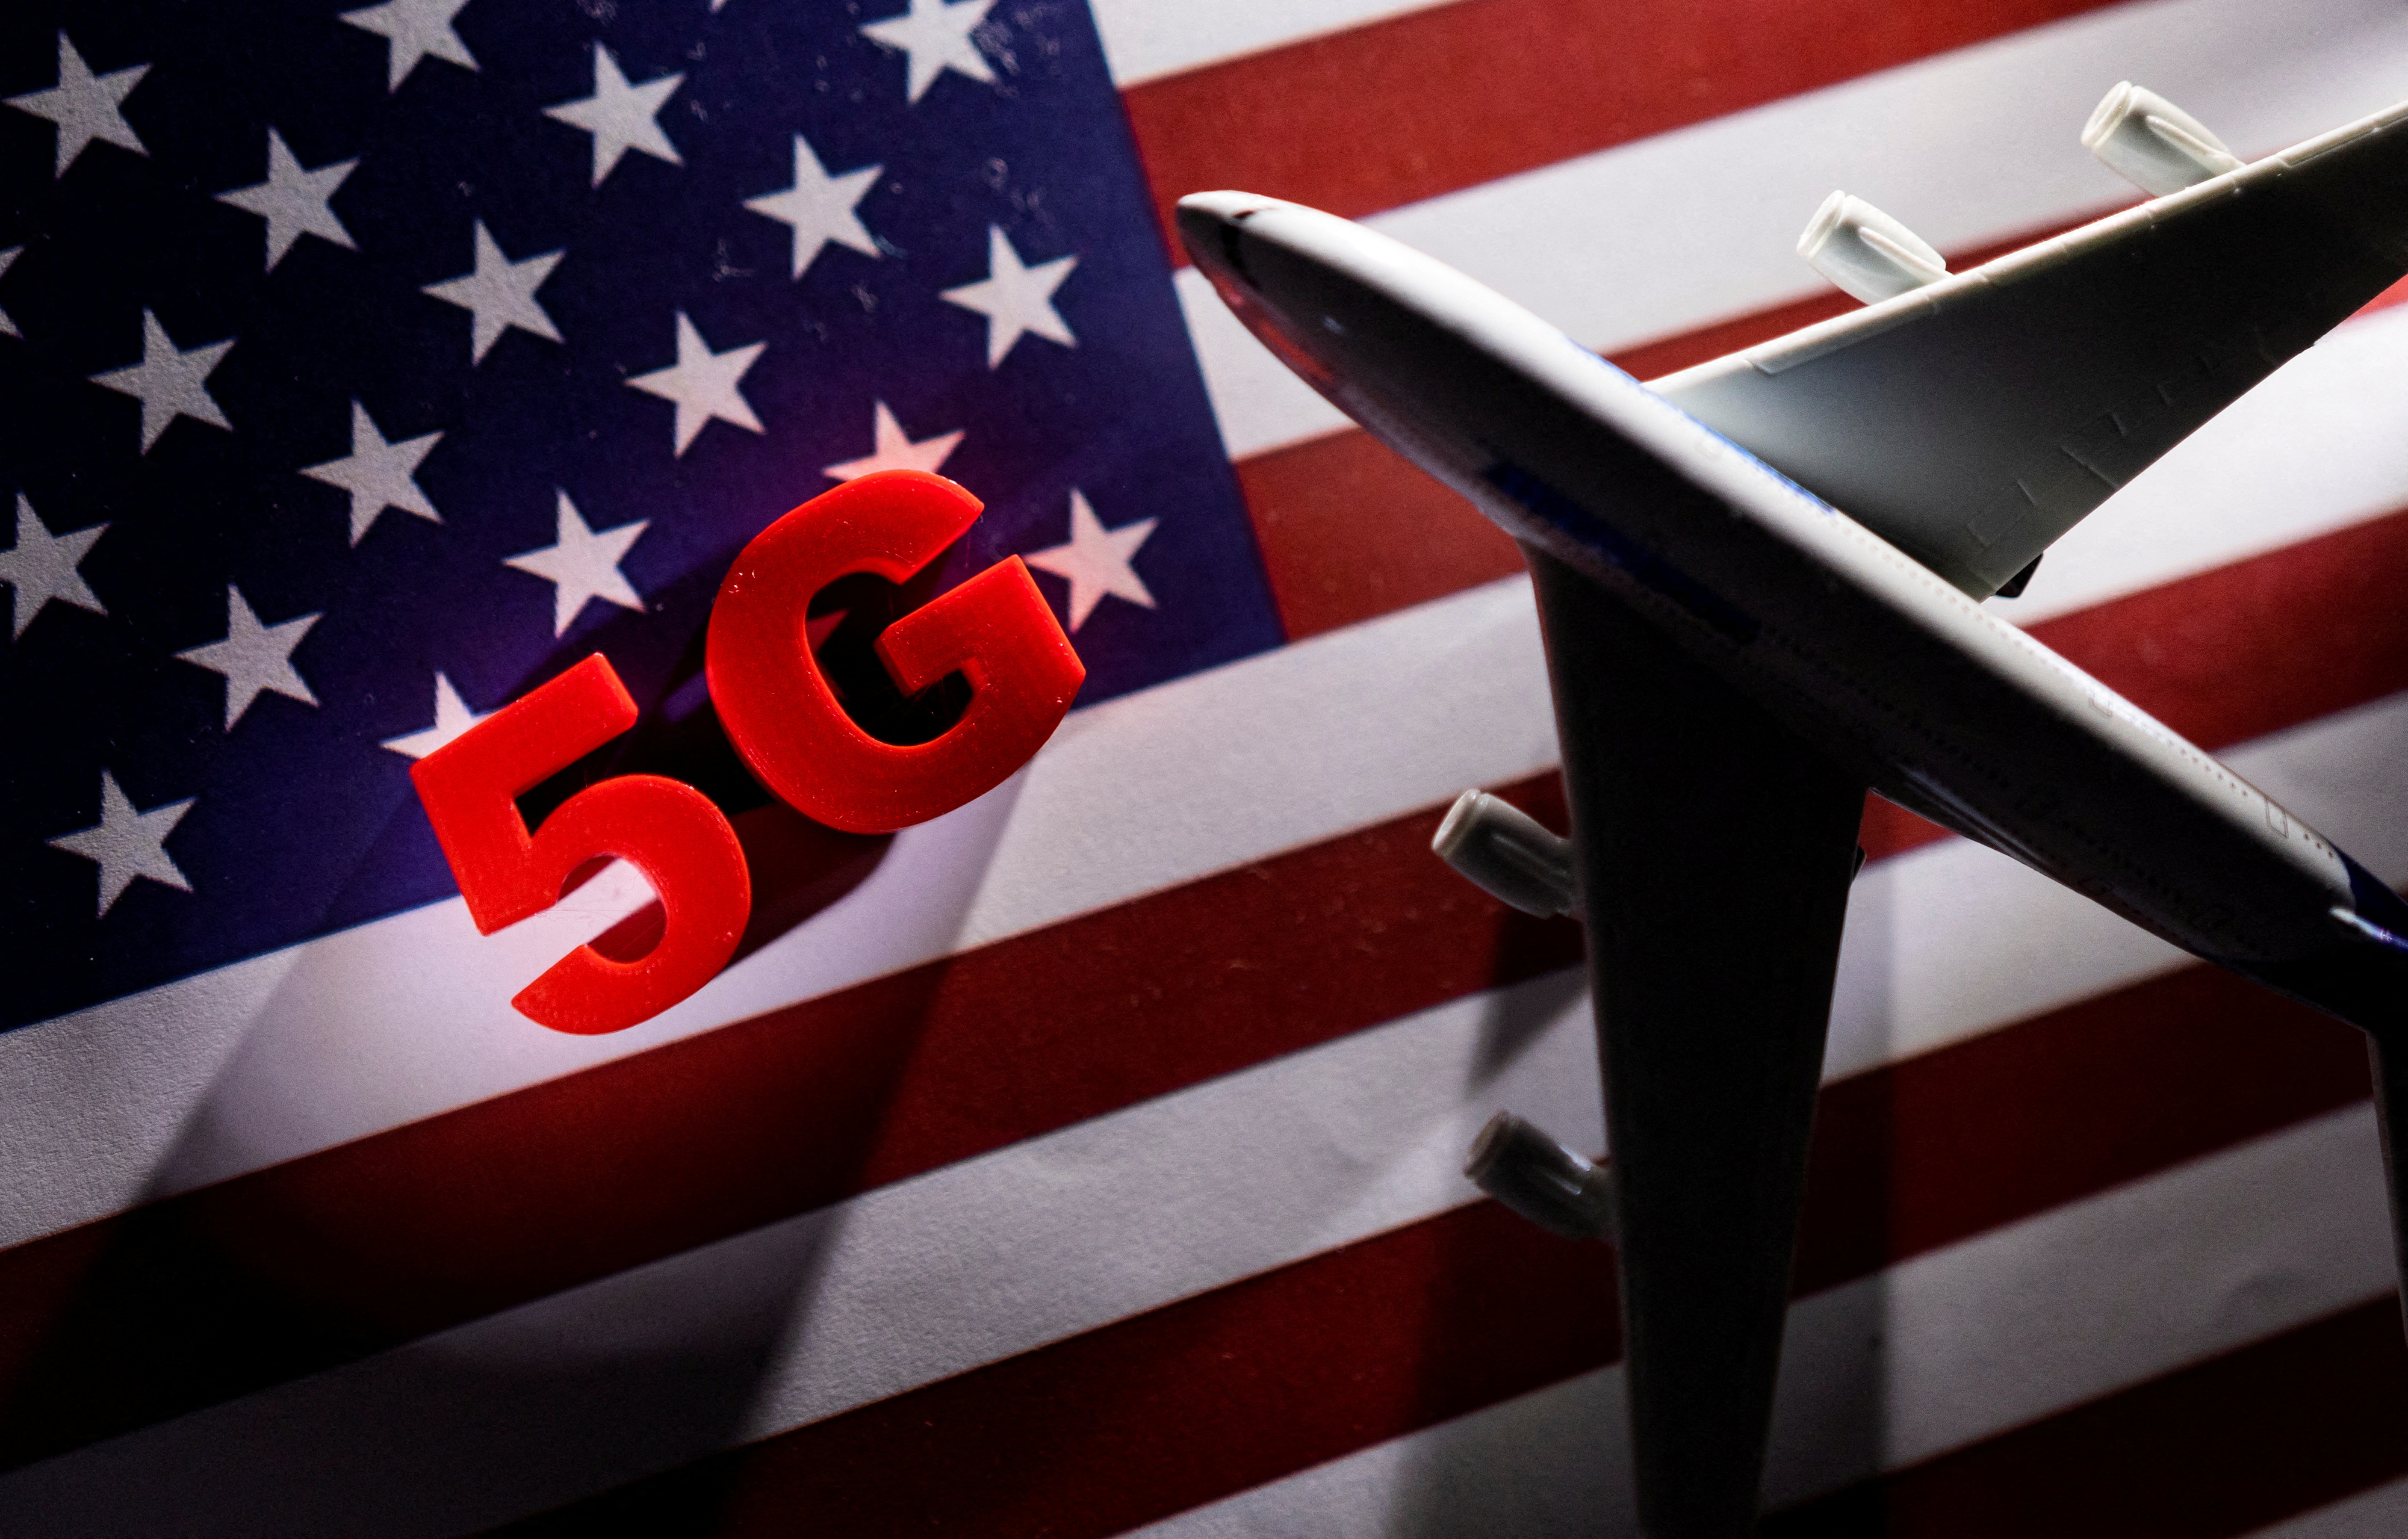 5G words and an airplane toy are placed on a printed U.S. flag in this illustration